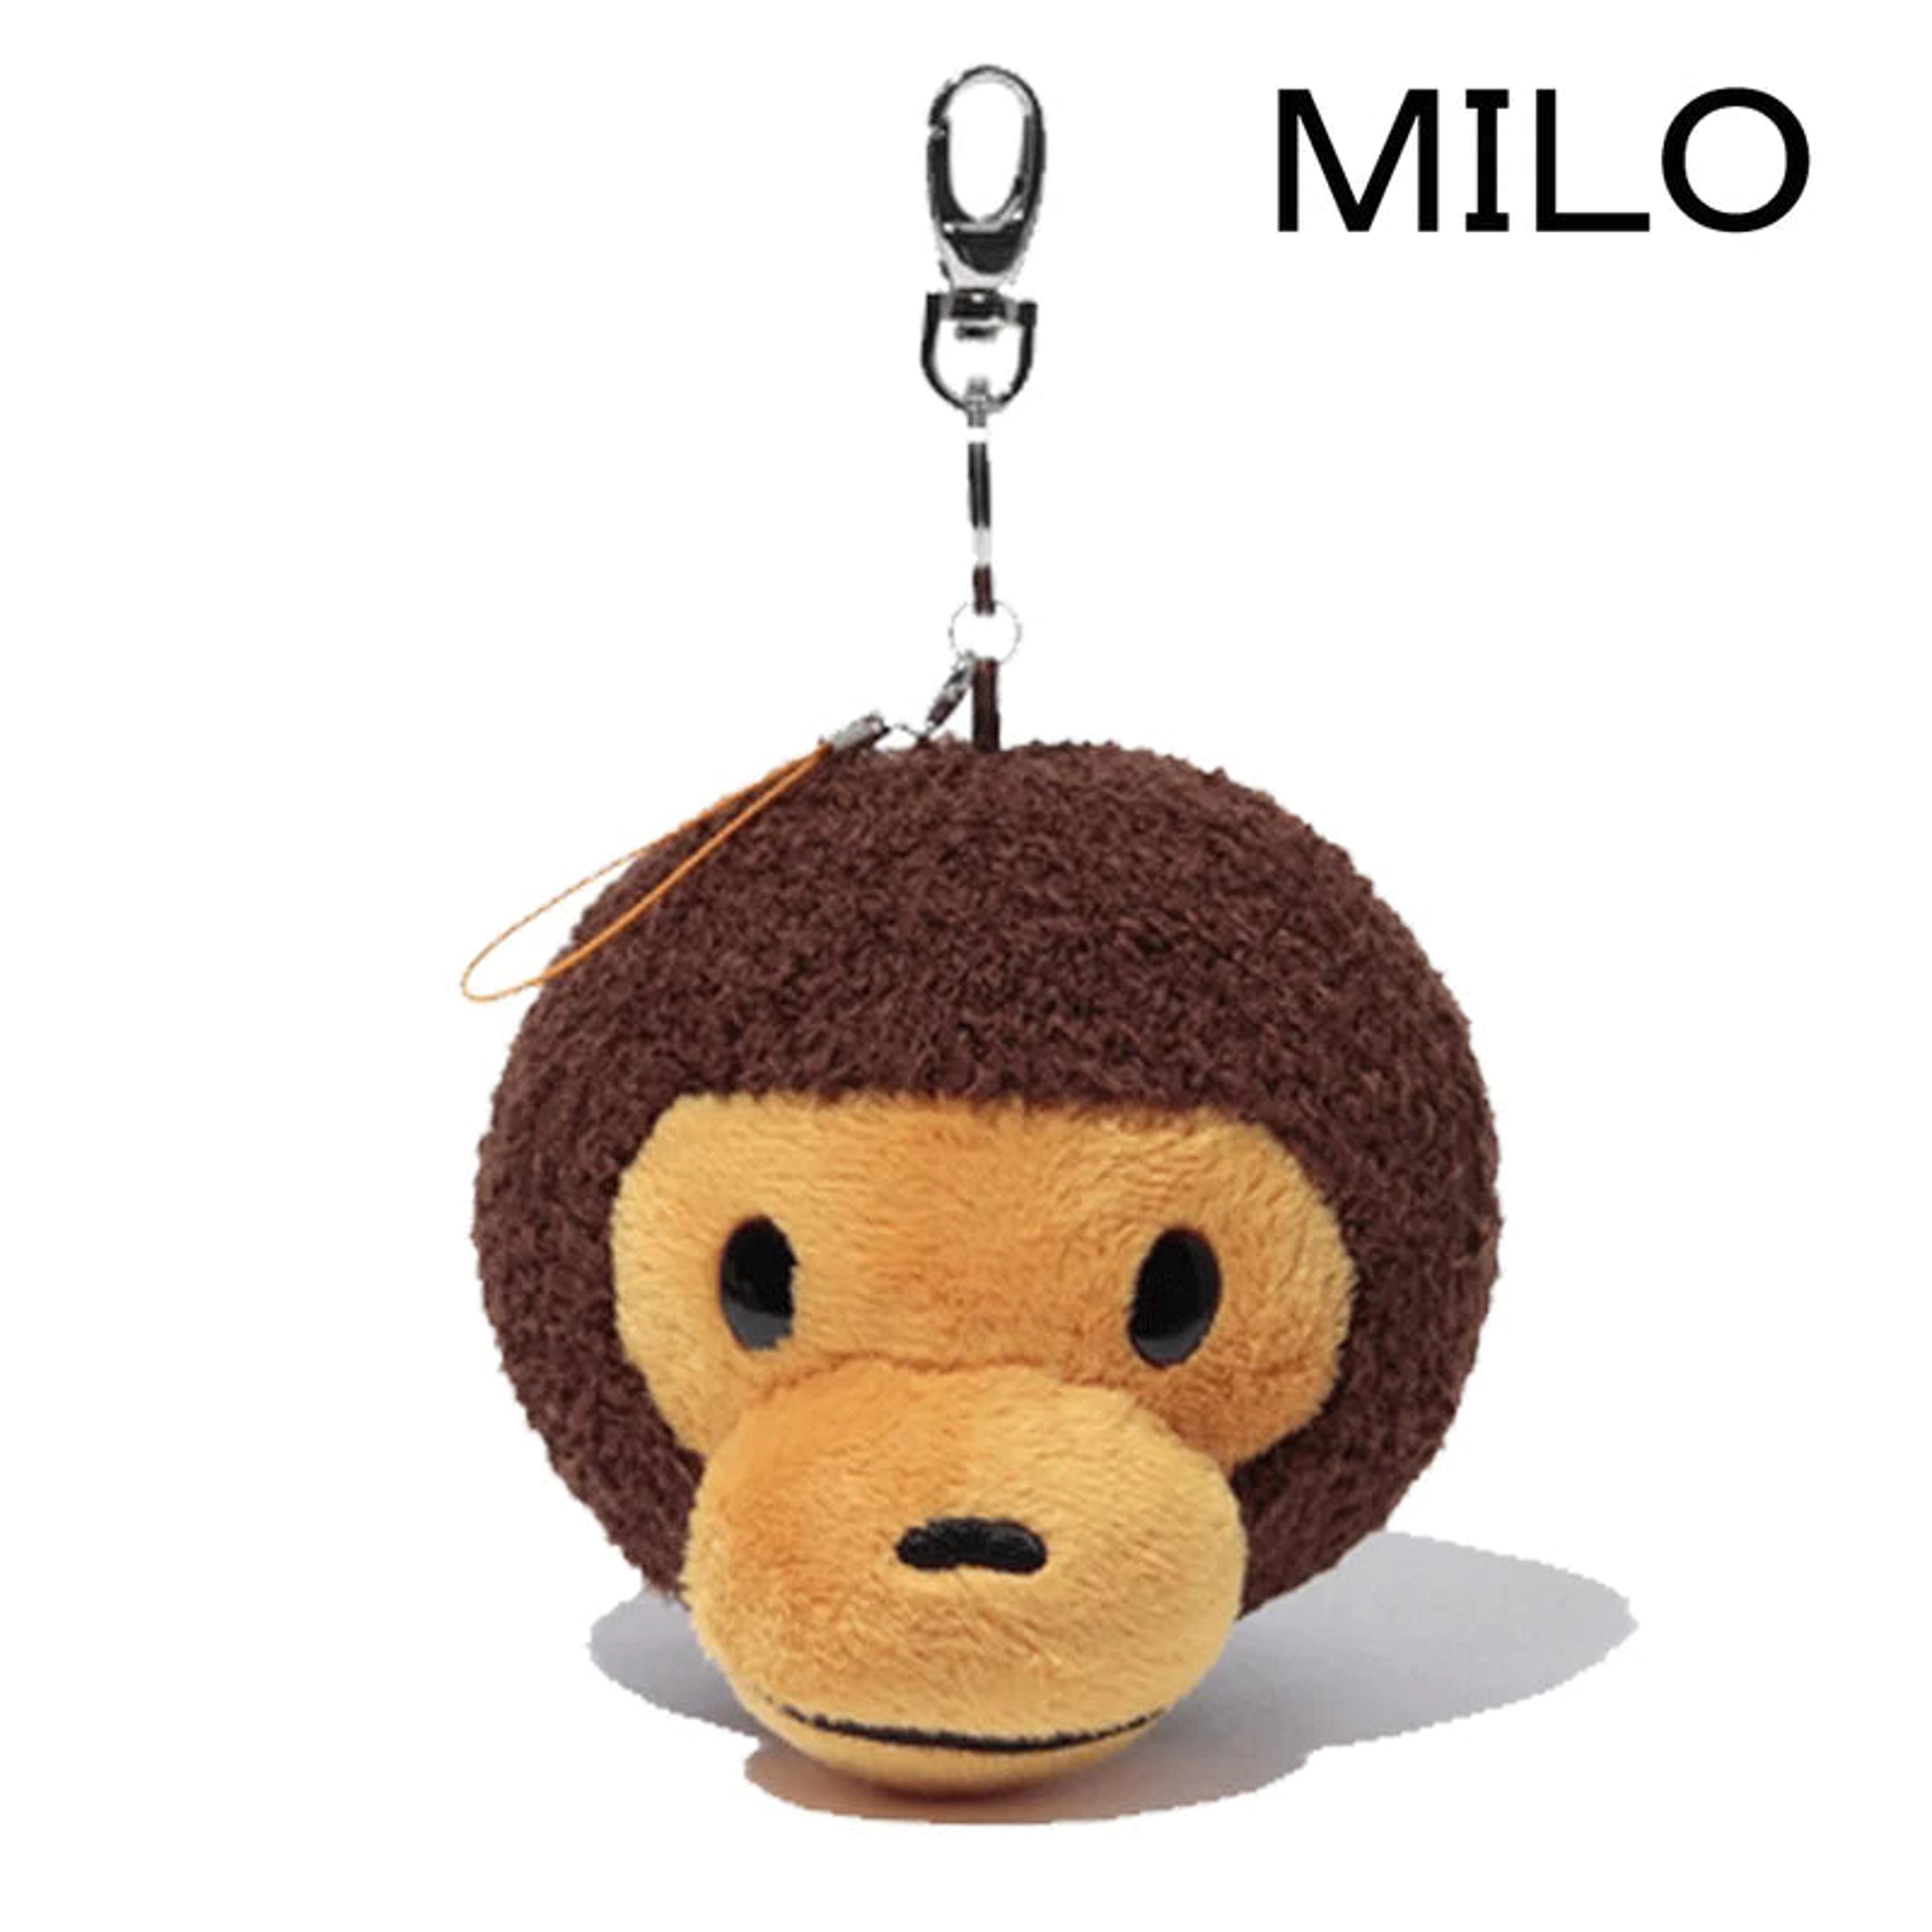 Alternate View 7 of A BATHING APE Goods BABY MILO STORE KEY CHAIN FACE PLUSH